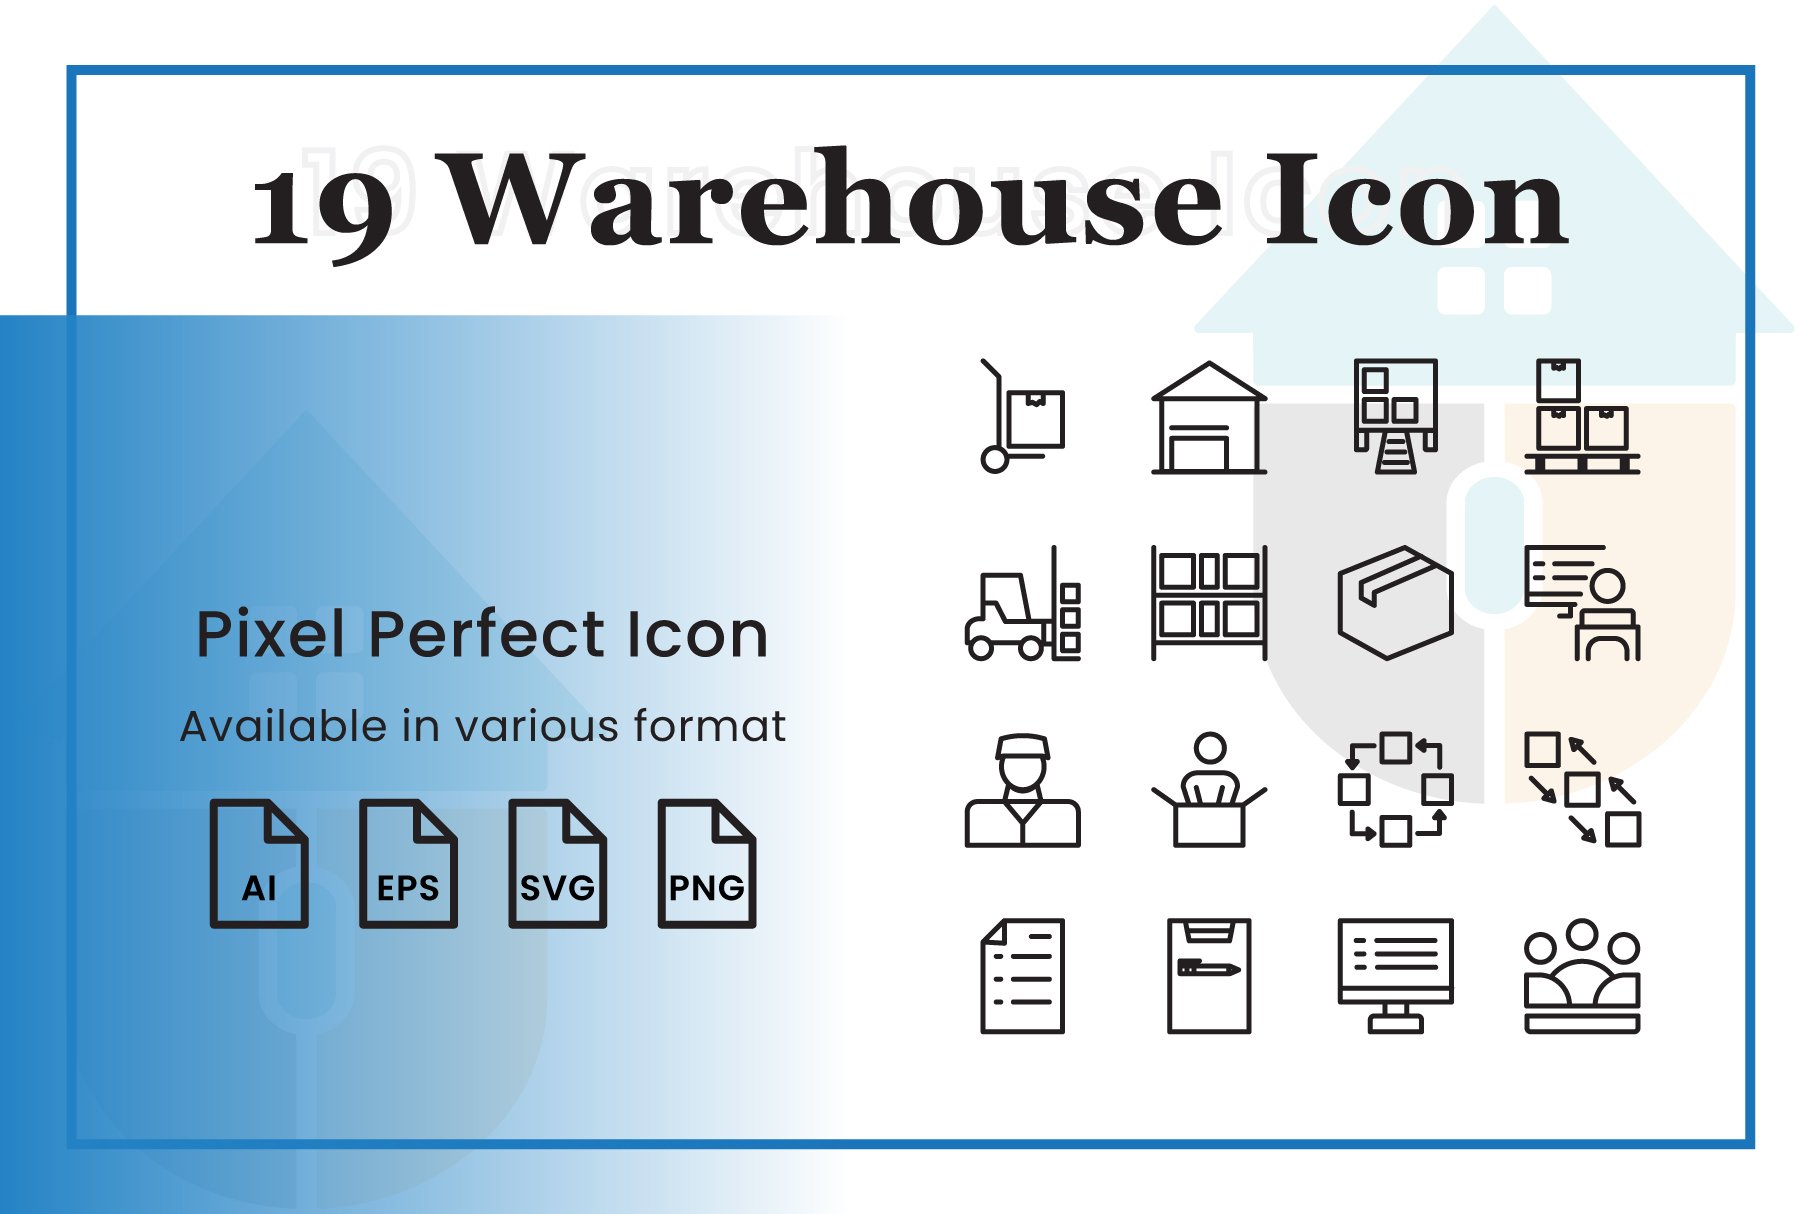 Warehouse icon cover image.